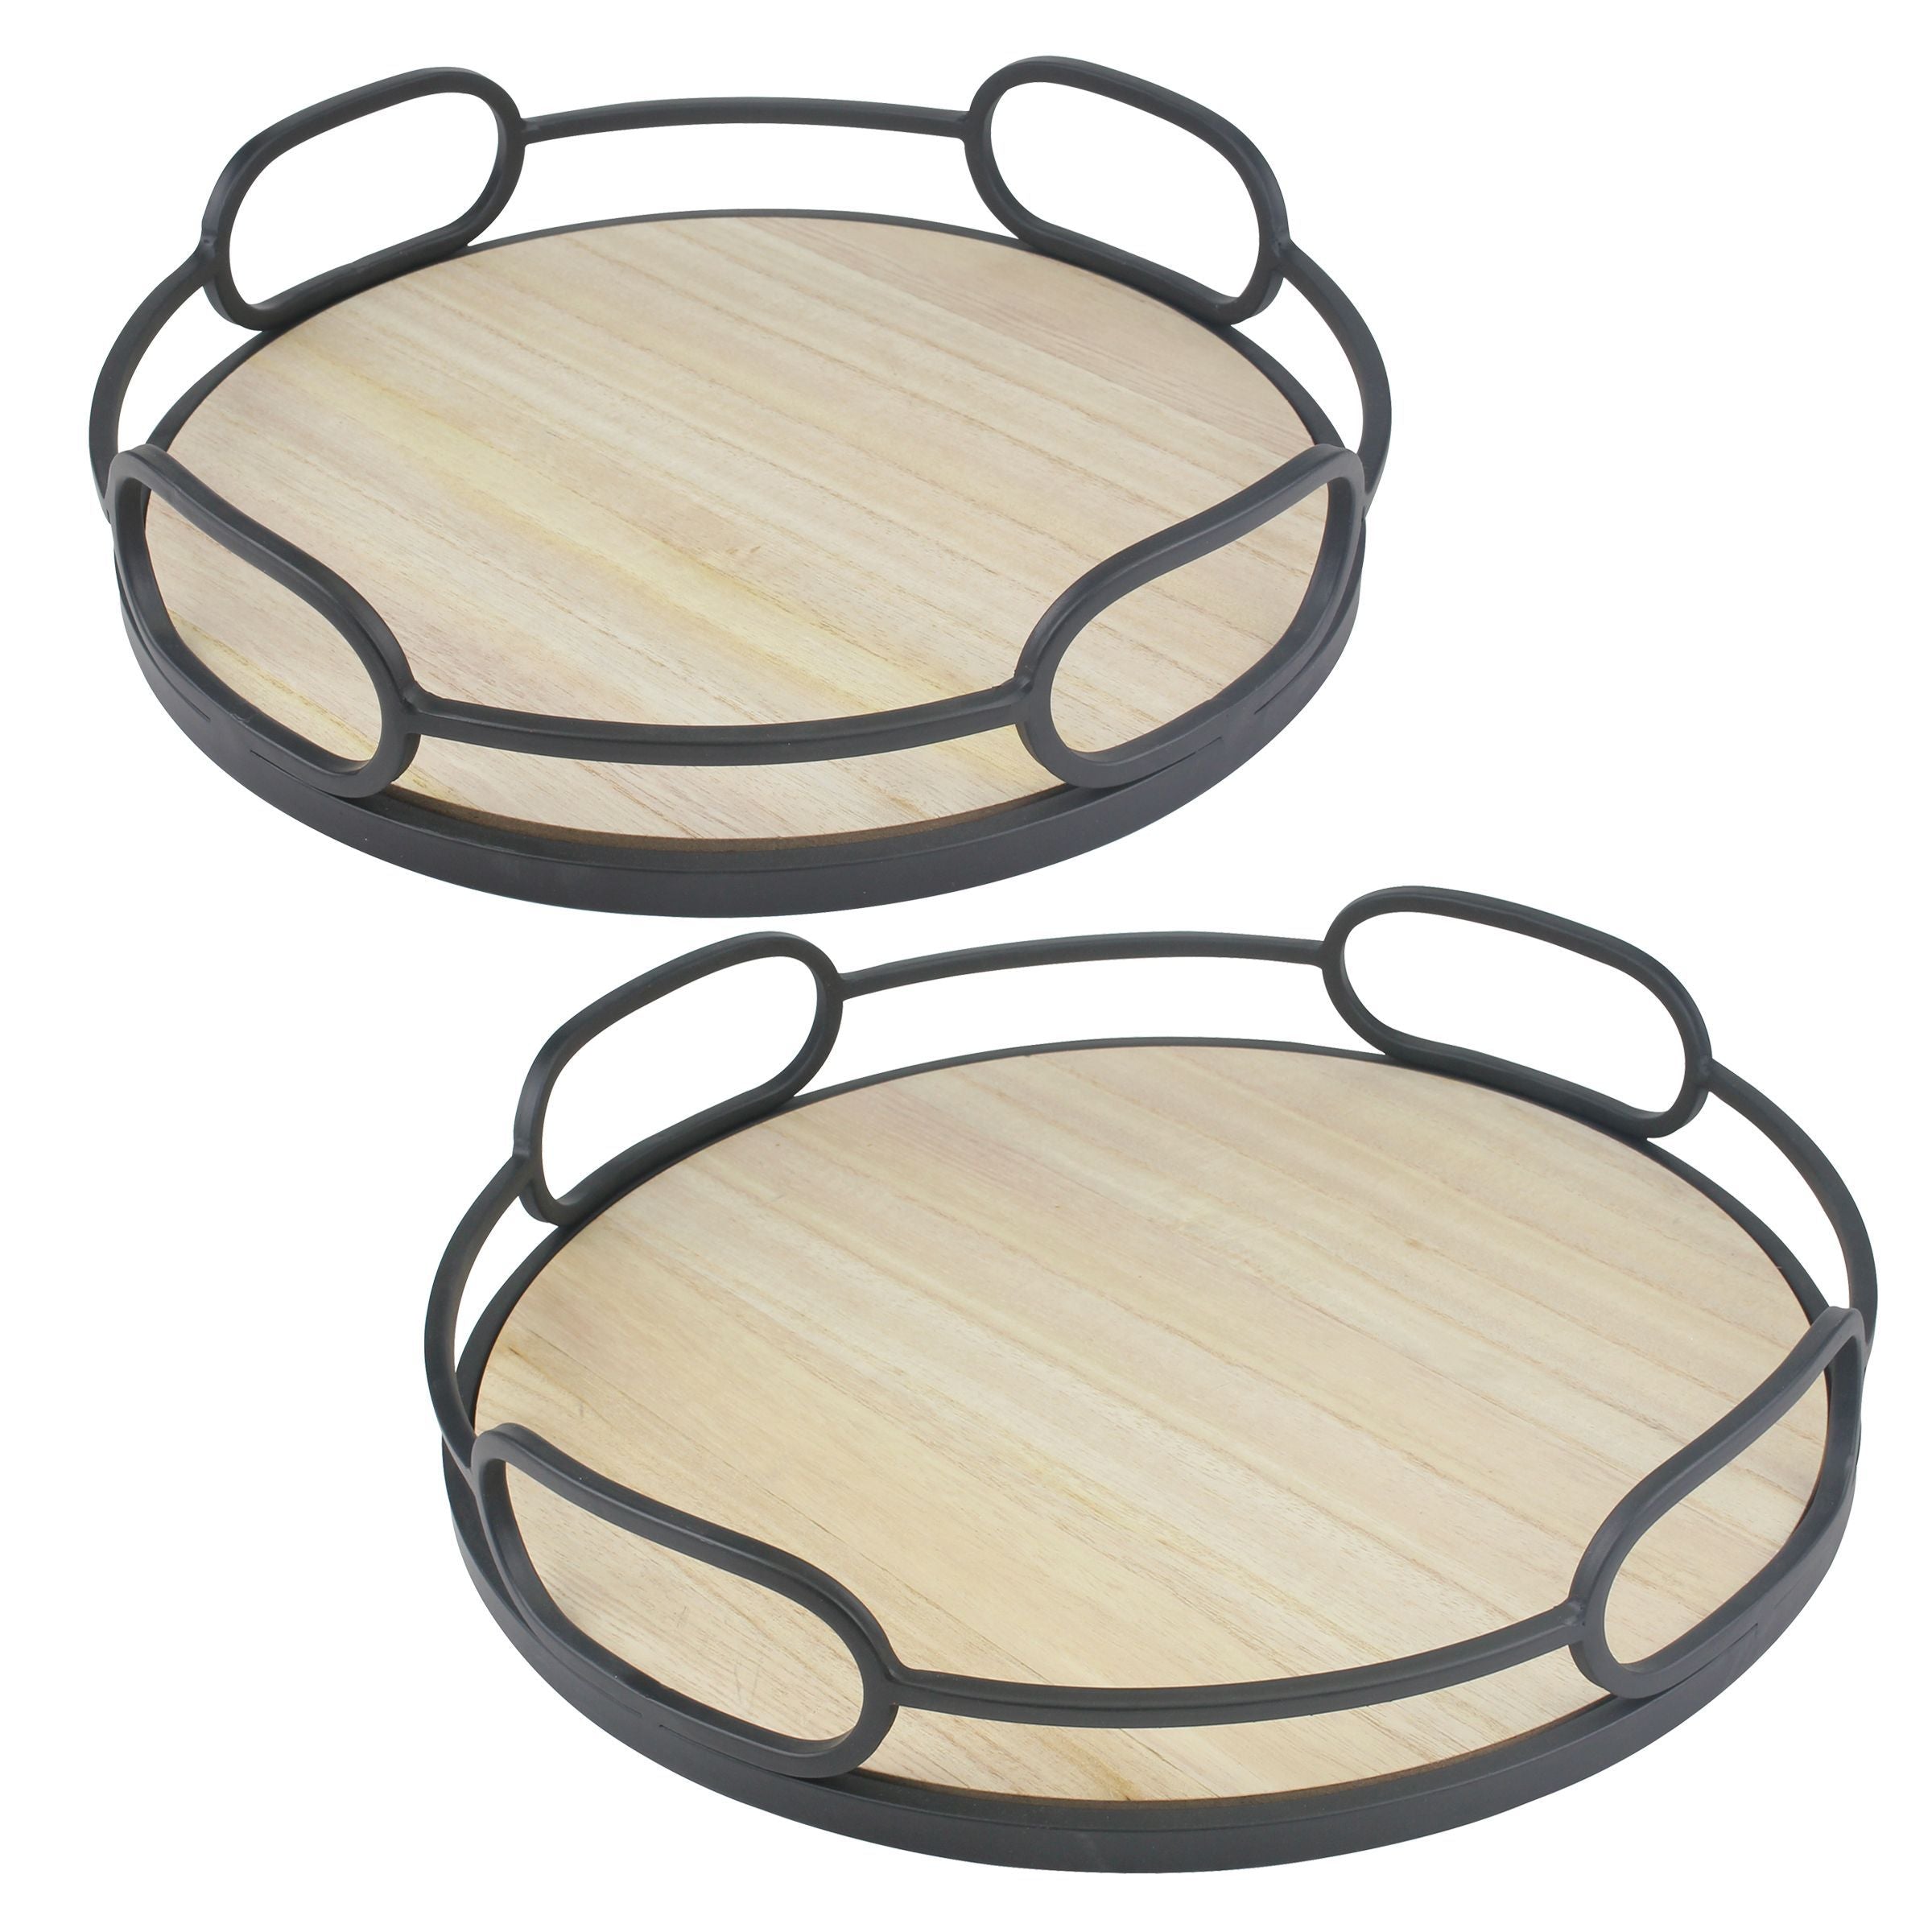 2-Piece Decorative Circle Tray Set, Wood and Metal, Brown (WS)